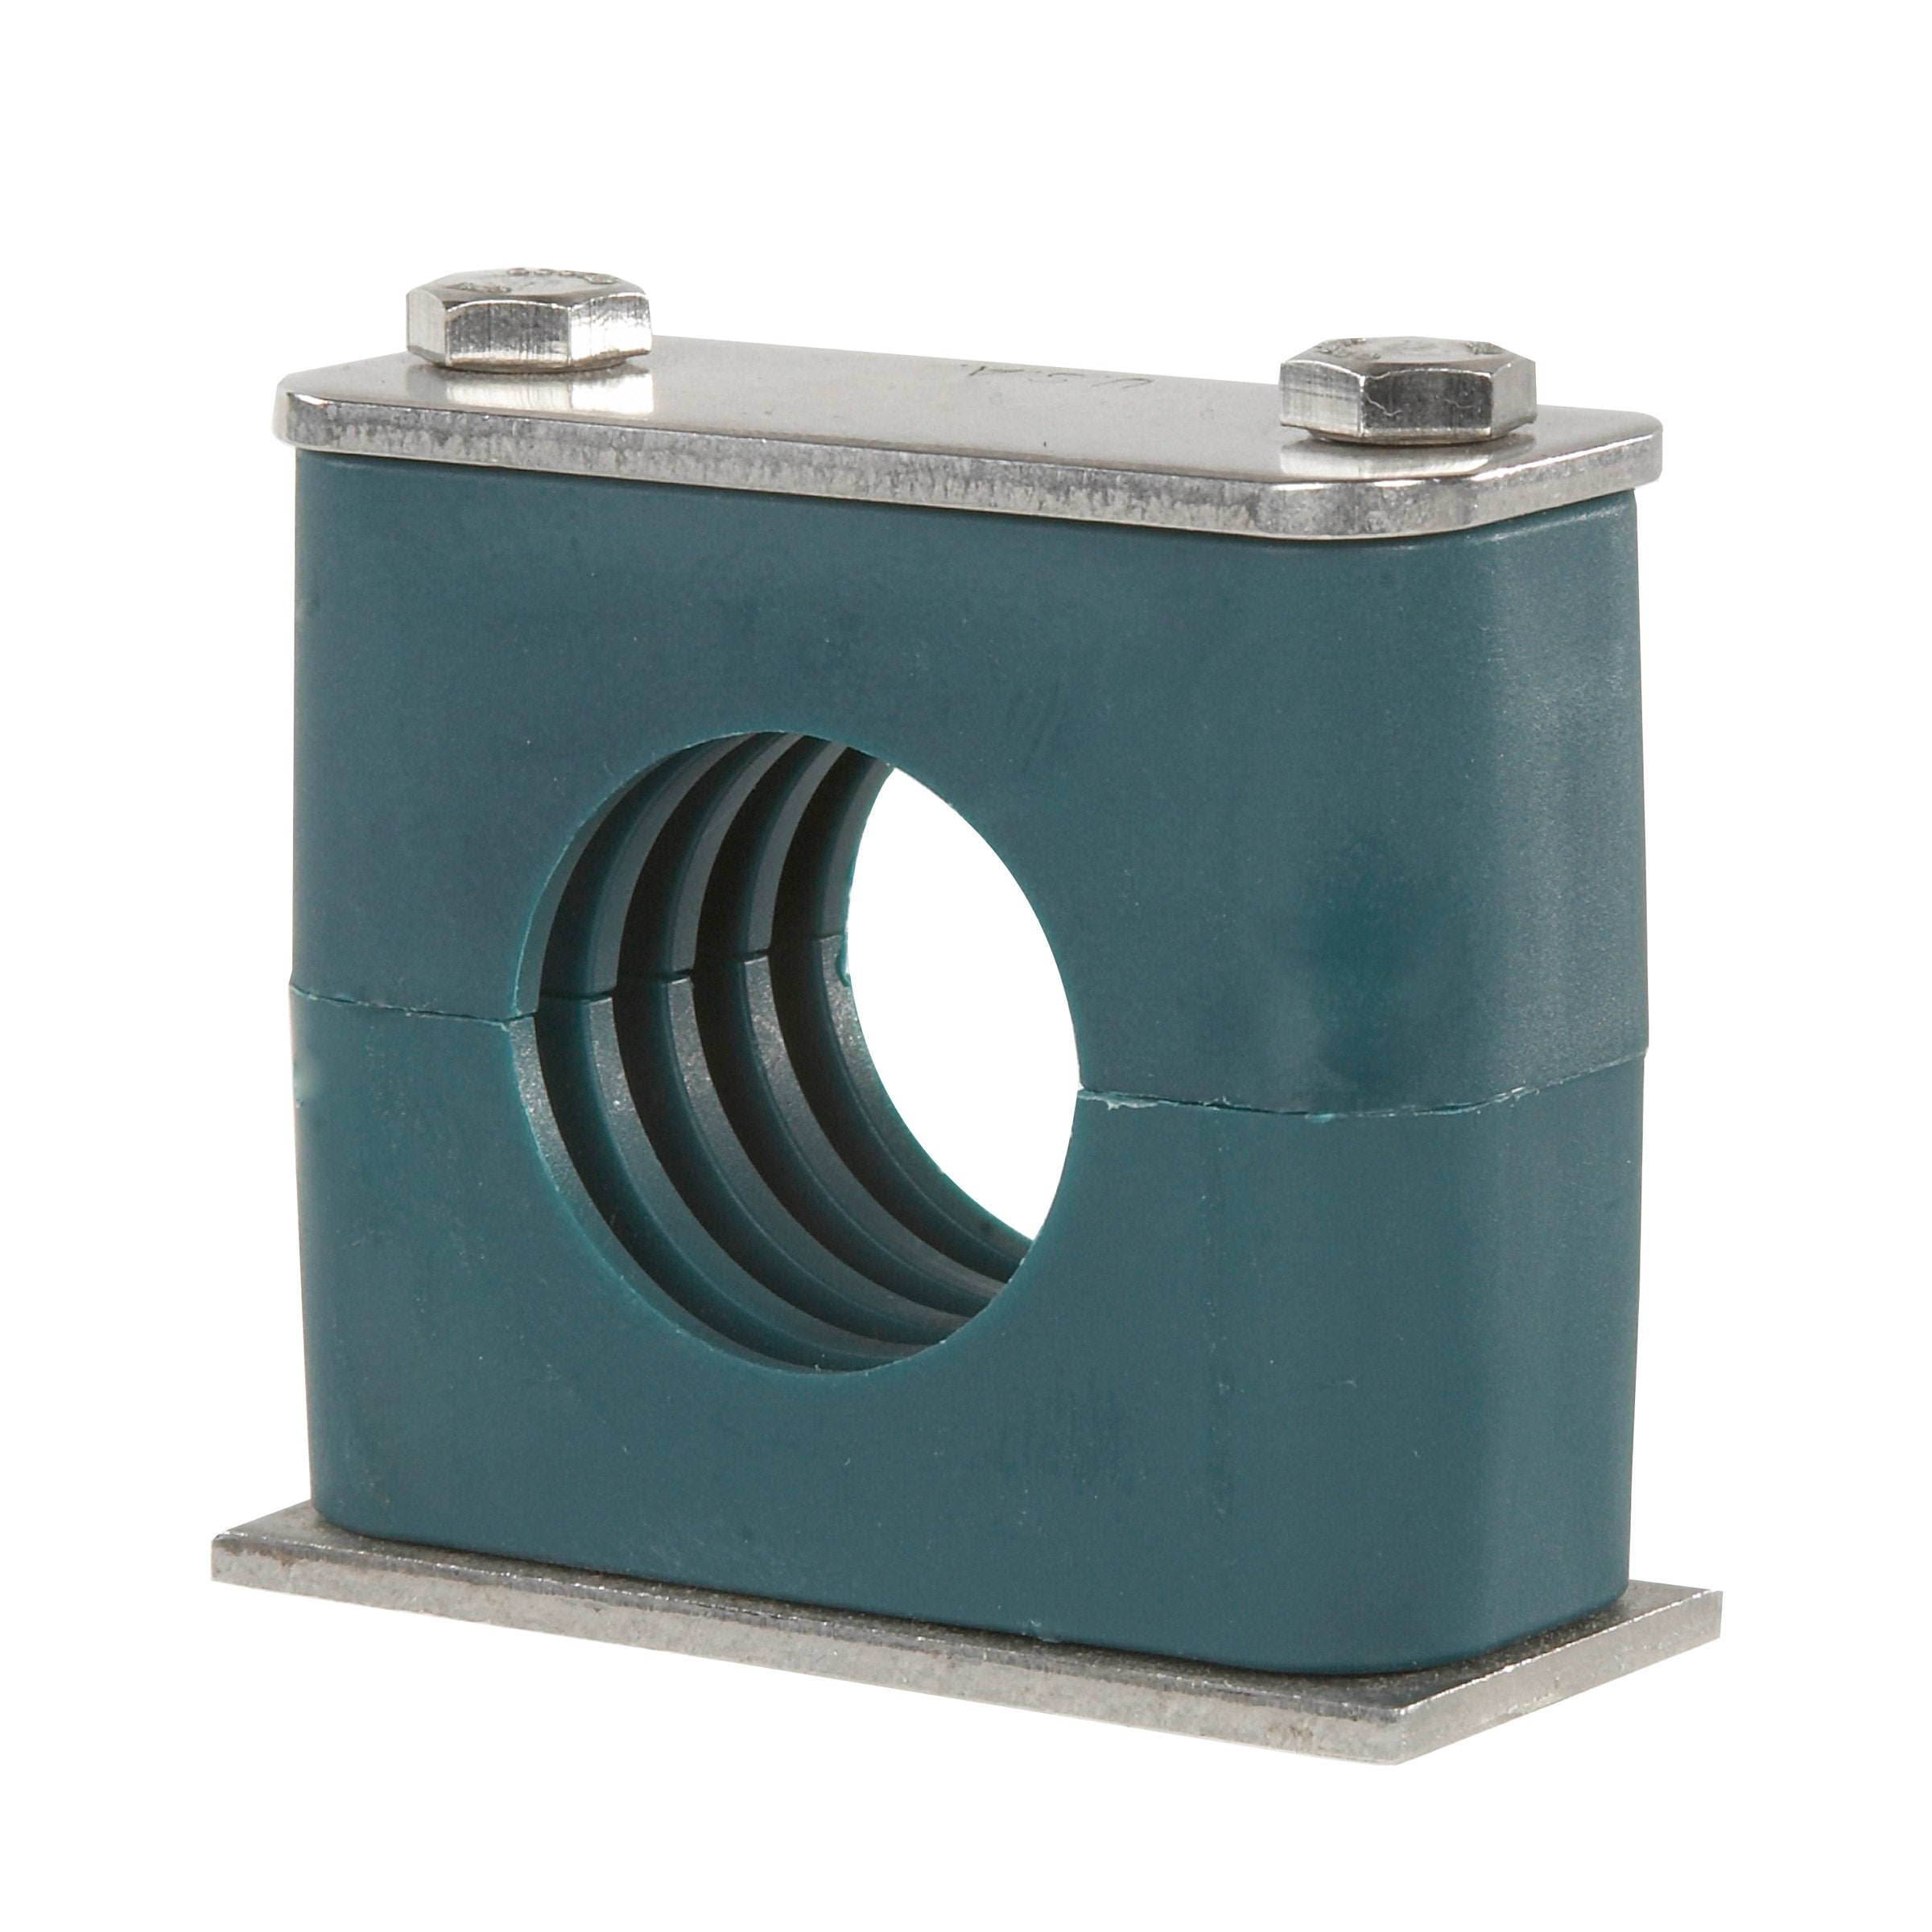 SP-321.3-PP-DP-AS-U-W10 : Stauff Clamp, Single Weld Plate, 0.84" (21.3mm) OD, for 1/2" Pipe, Green PP Insert, Profiled Interior, Carbon Steel